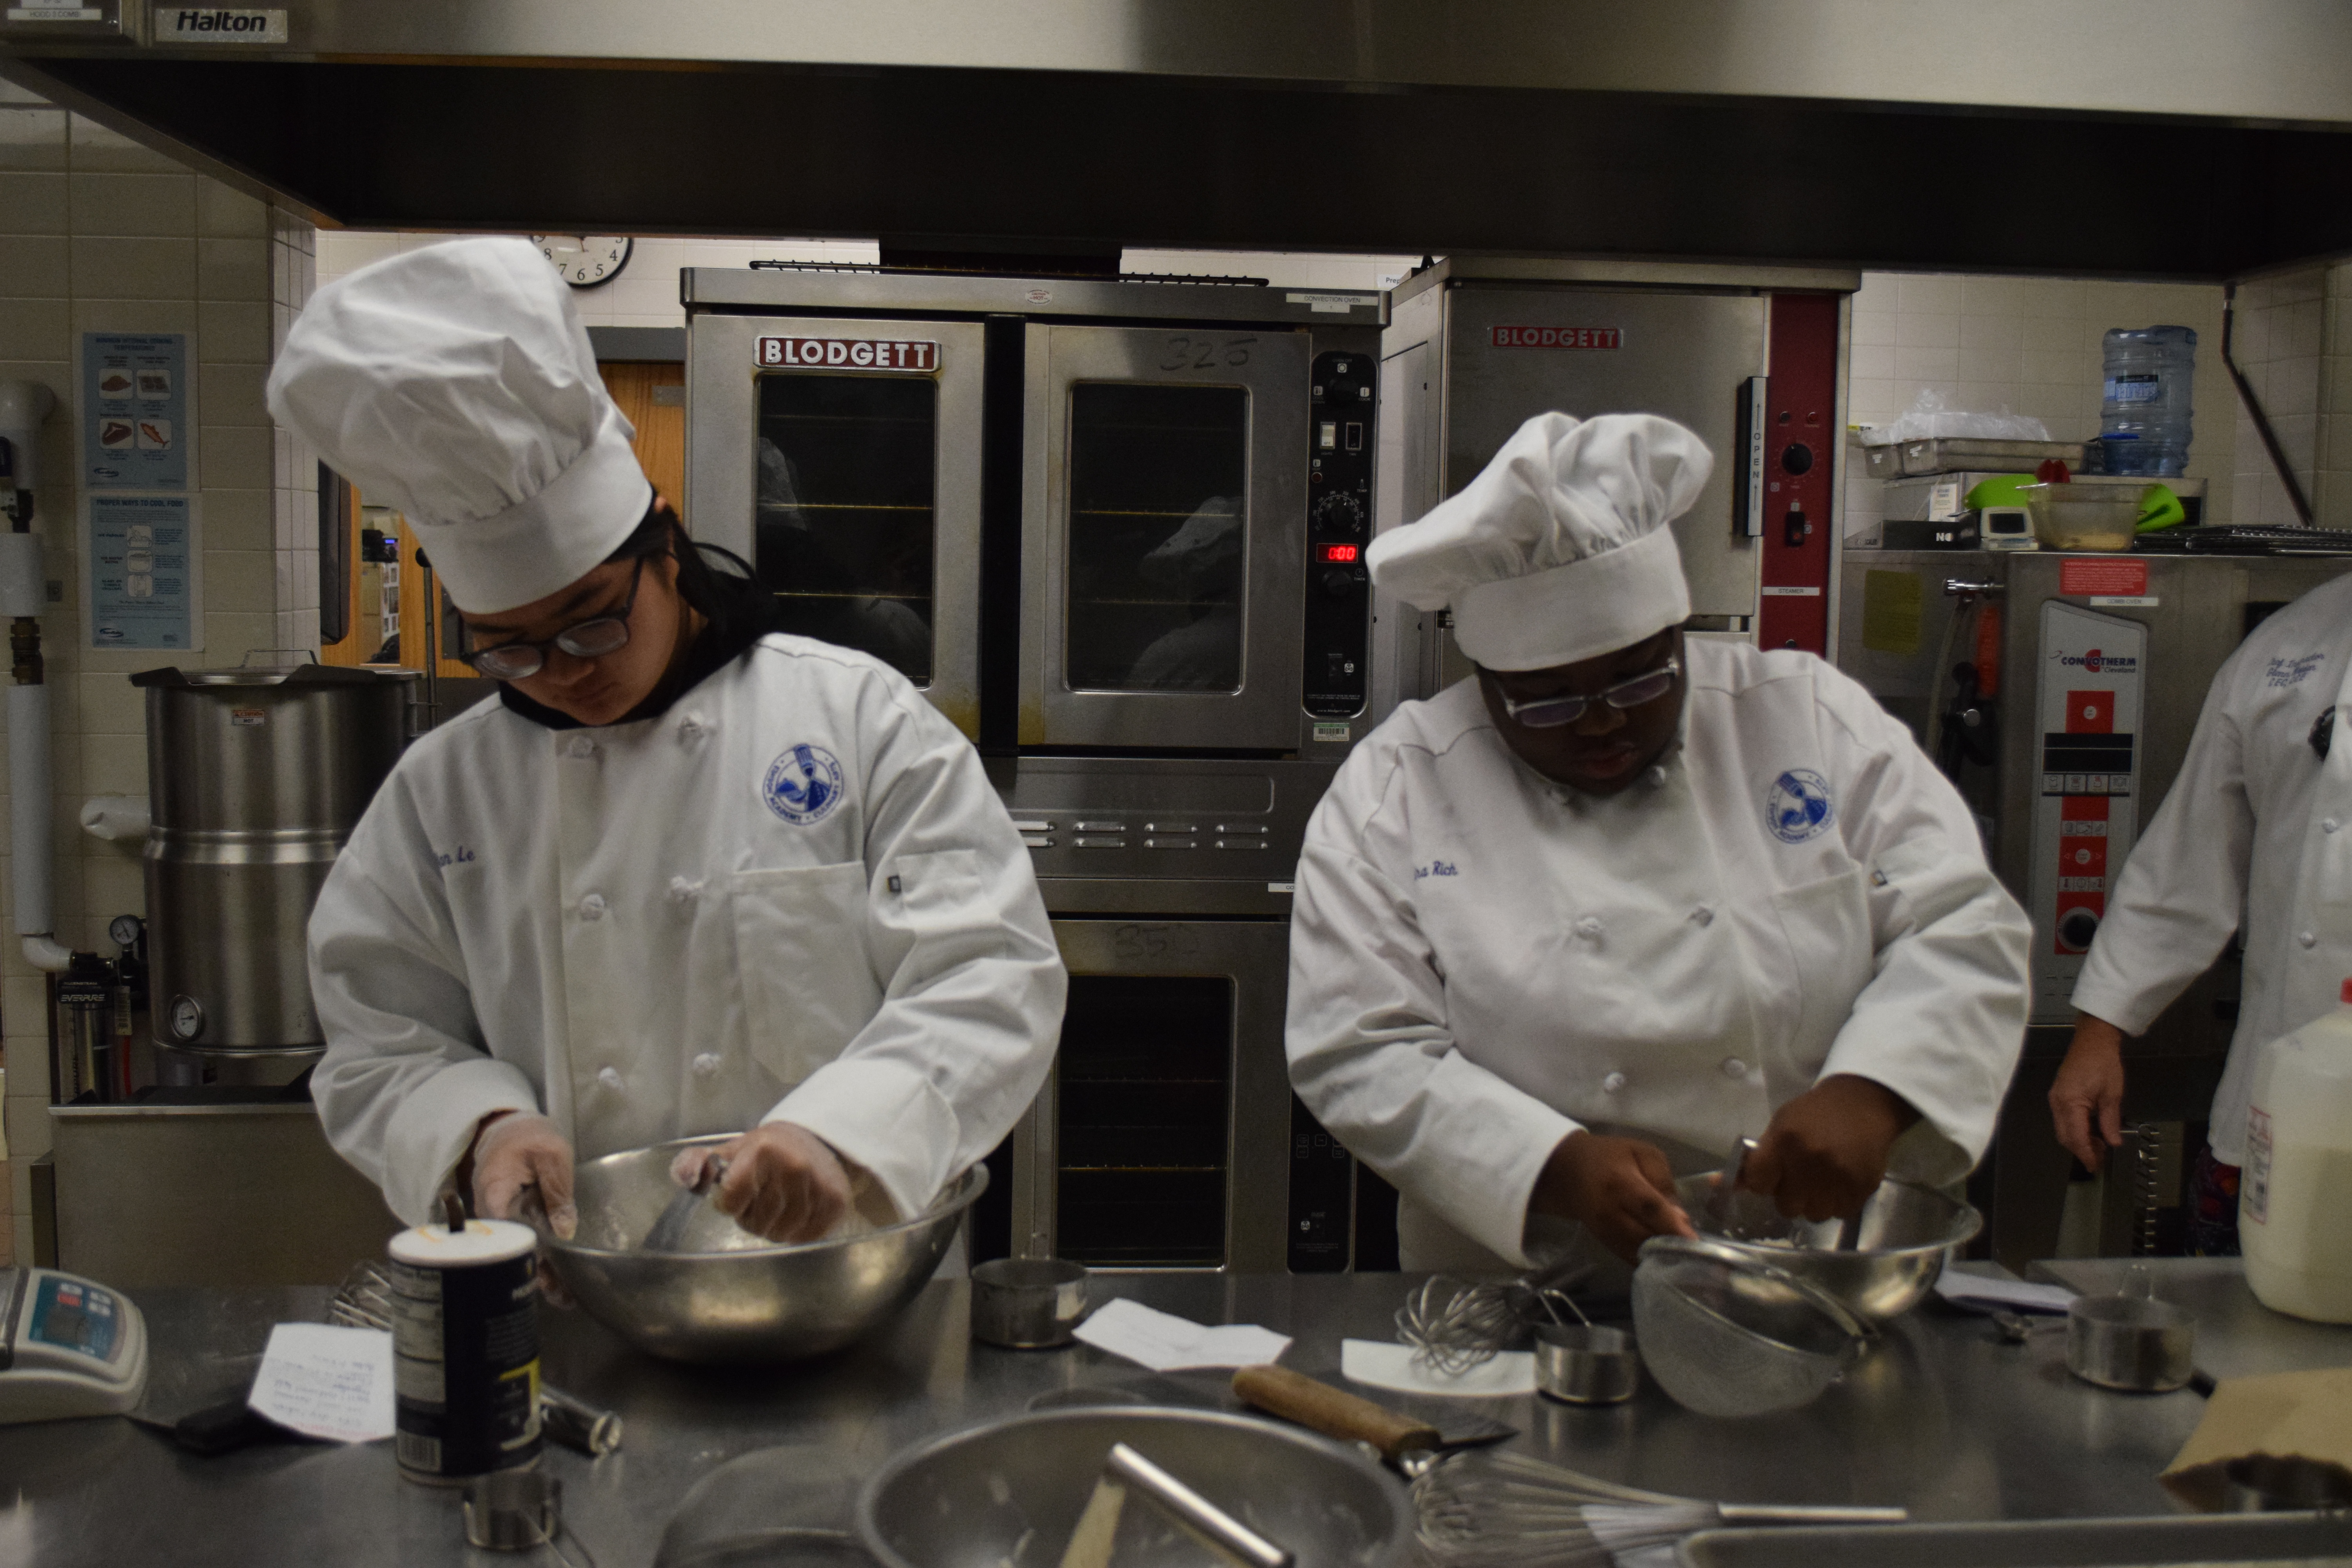 Culinary students preparing Bistro meals for take out orders.